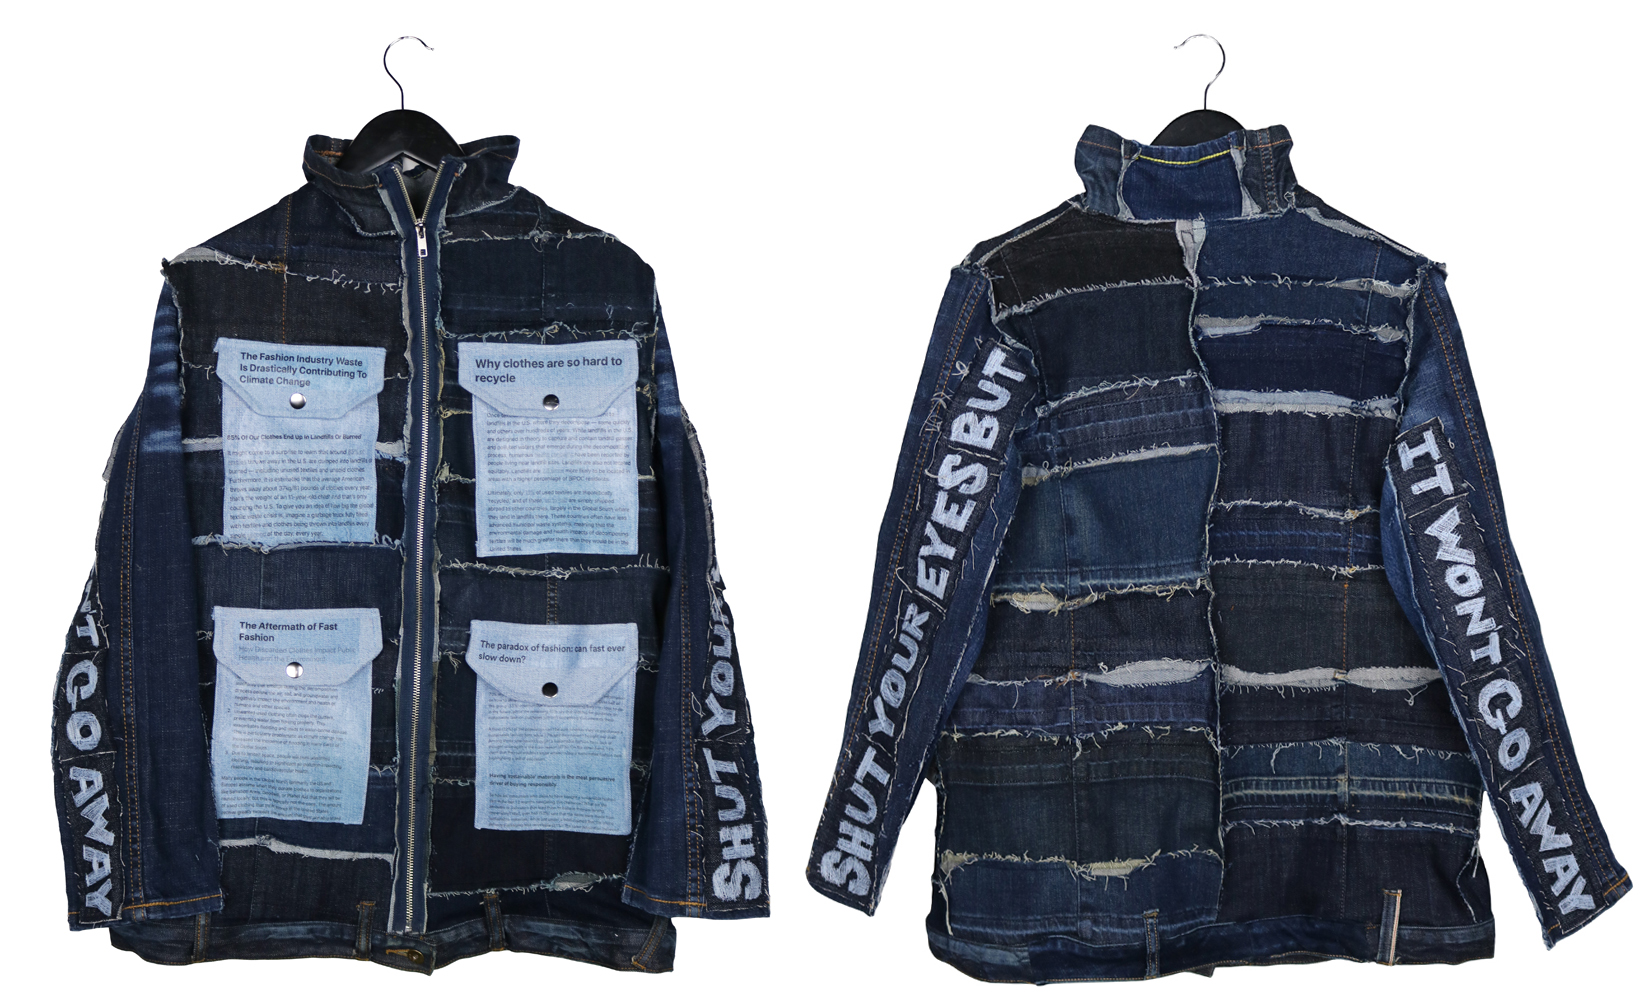 Jacket made up upcycled clothing scraps with messages about clothing industry's environmental impact